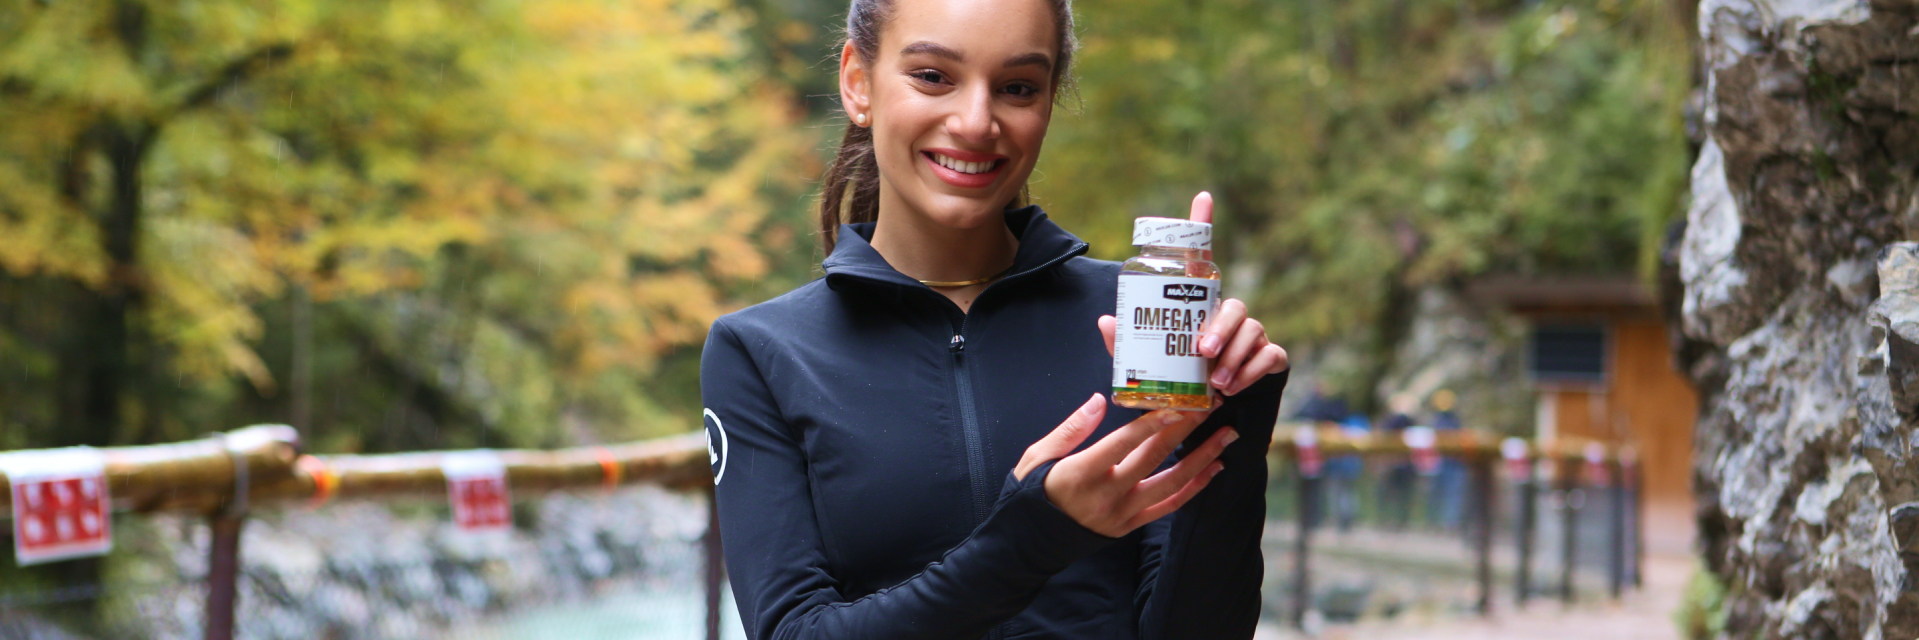 A smiling woman with a Omega-3 Gold EU bottle